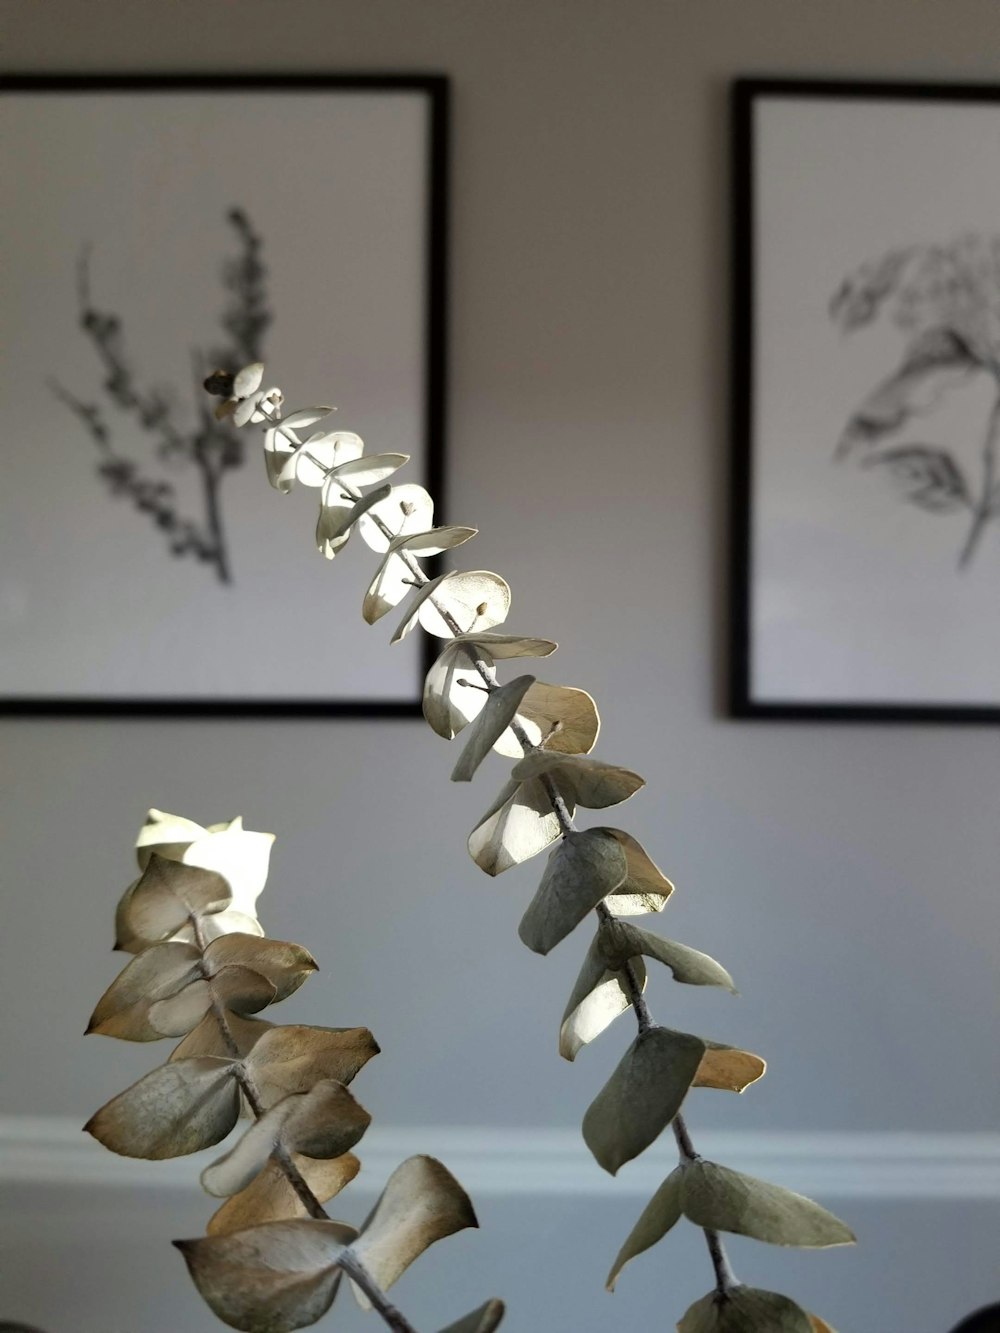 a metal sculpture of a plant in front of two framed pictures